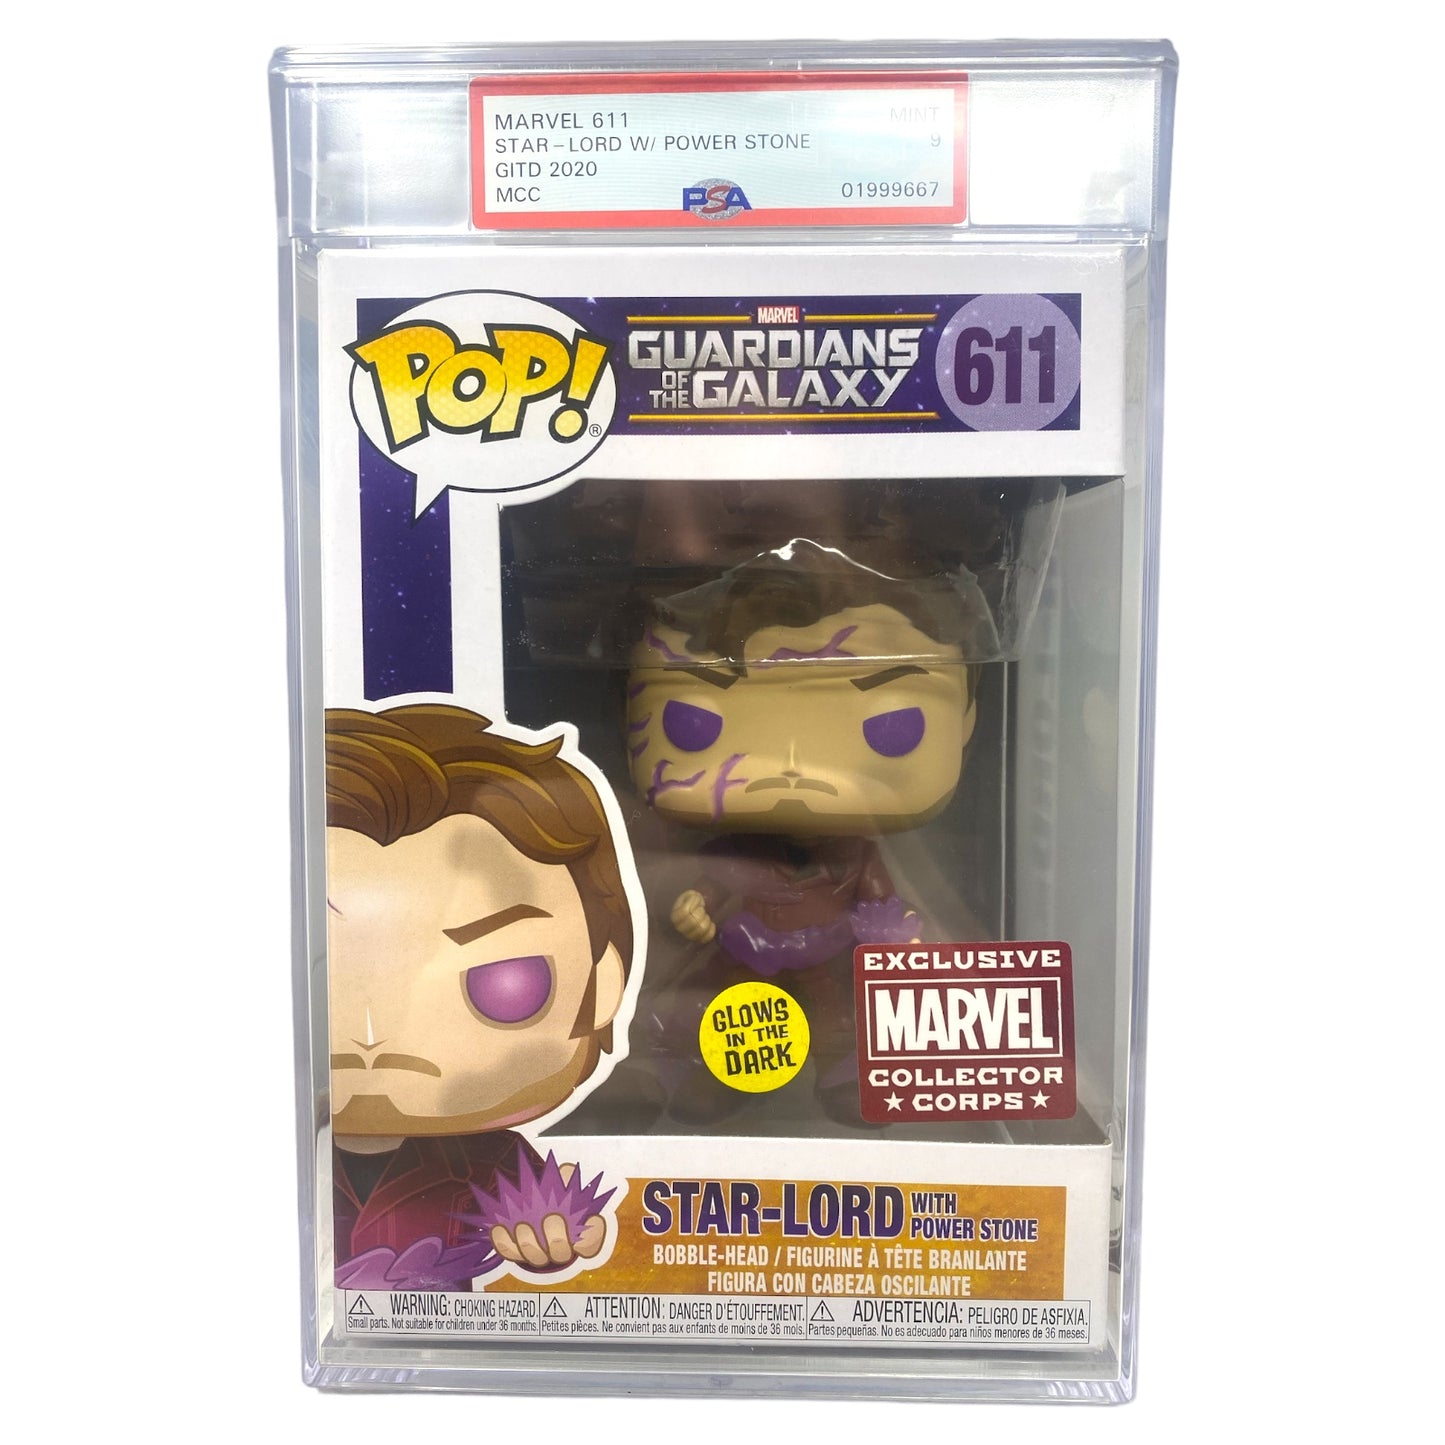 PSA Grade 9 2020 Star-Lord with Power Stone 611 Glow in the Dark MCC